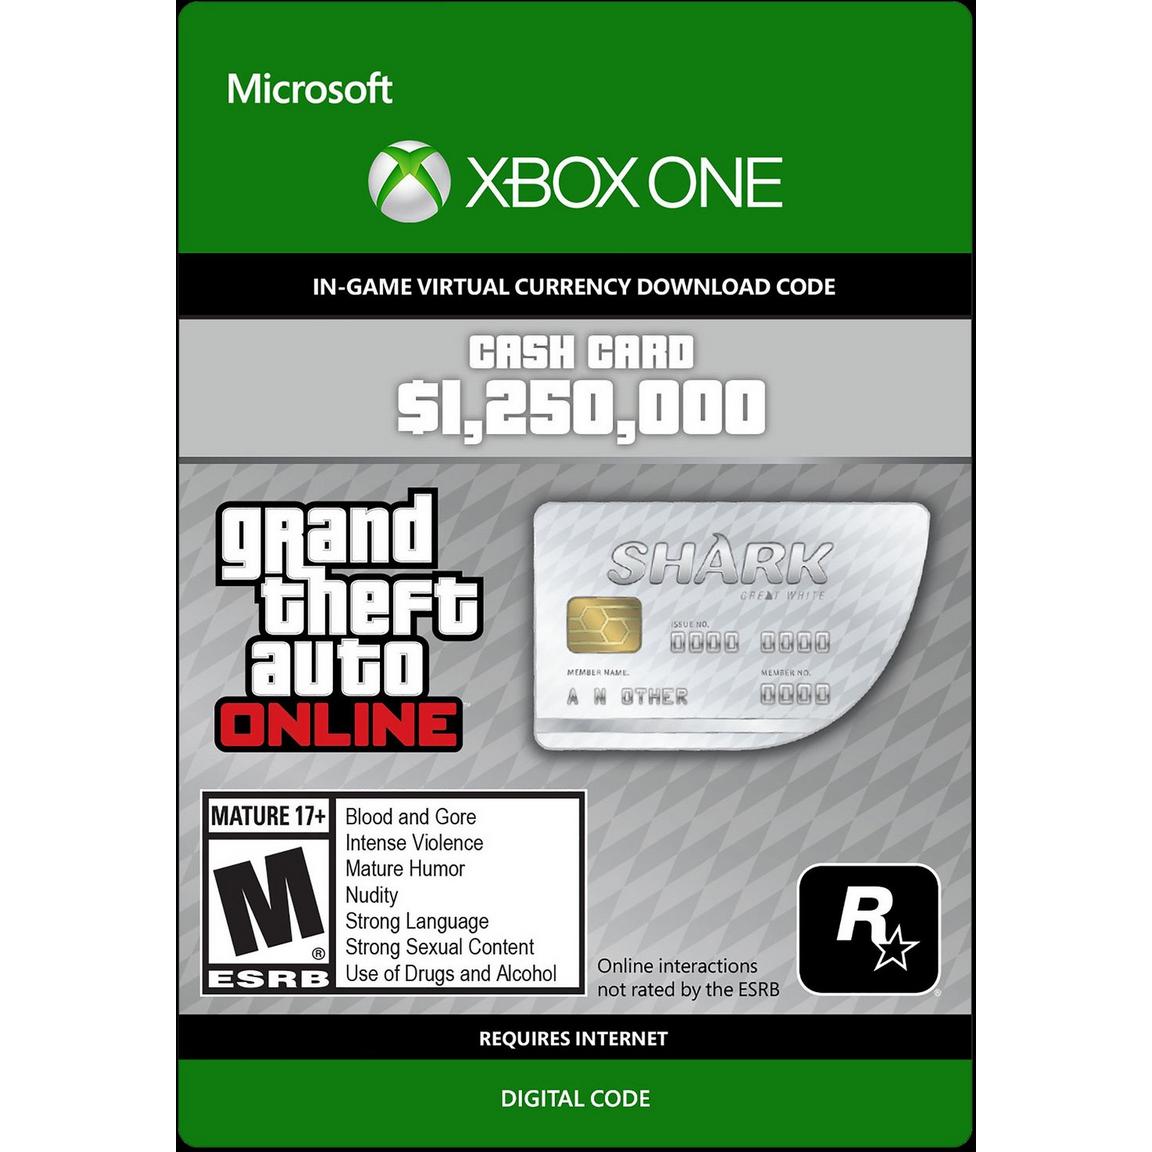 Rockstar Games Grand Theft Auto Online: The Great White Shark Cash Card - Xbox One -  7F6-00003